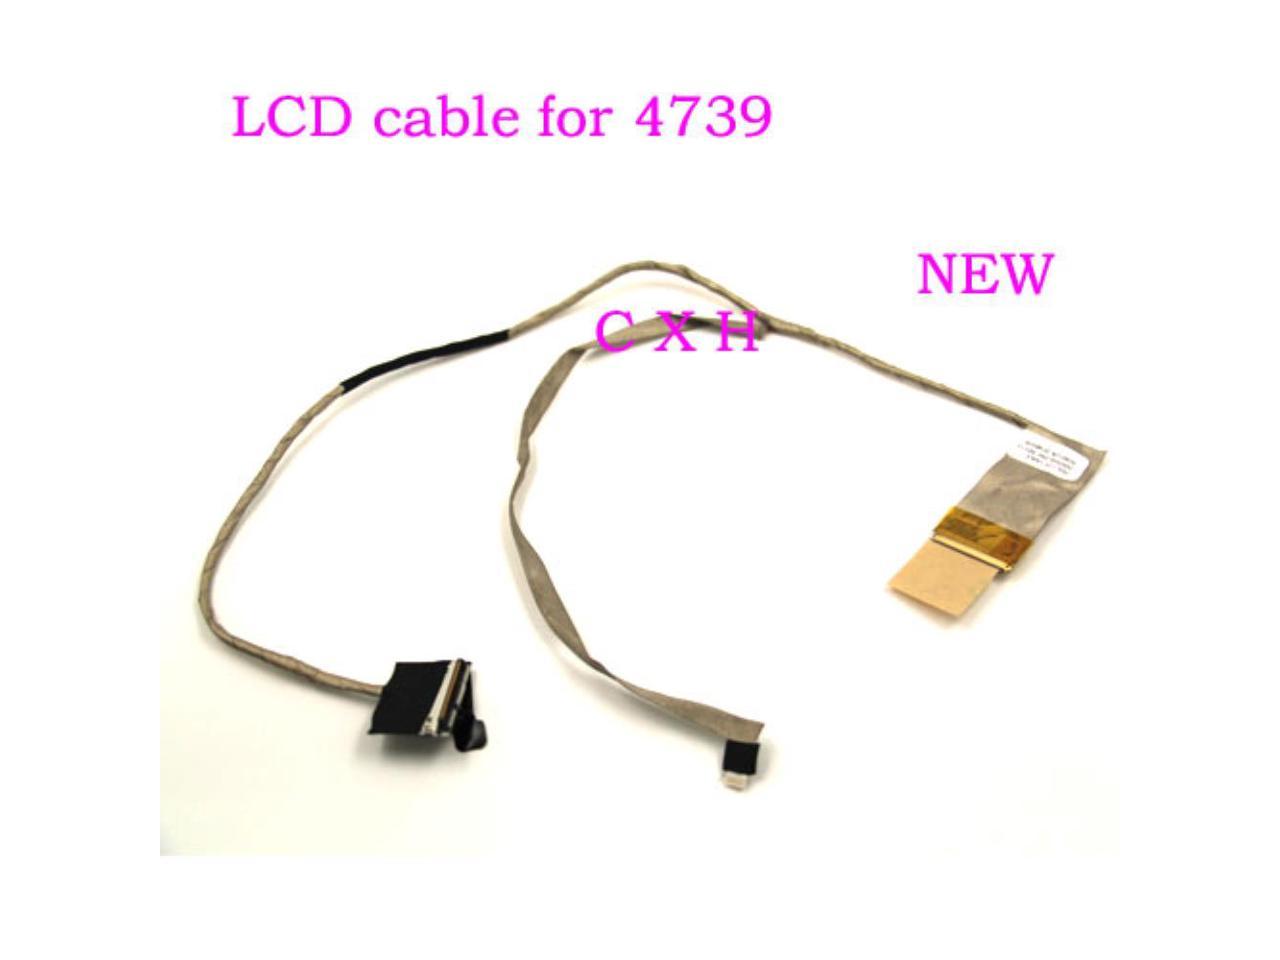 Cable Length: 3PCS Computer Cables Yoton Yoton for ACER Aspire 4739 4739Z 4339 4250 4253 LCD Video Cable DD0ZQQLC000 